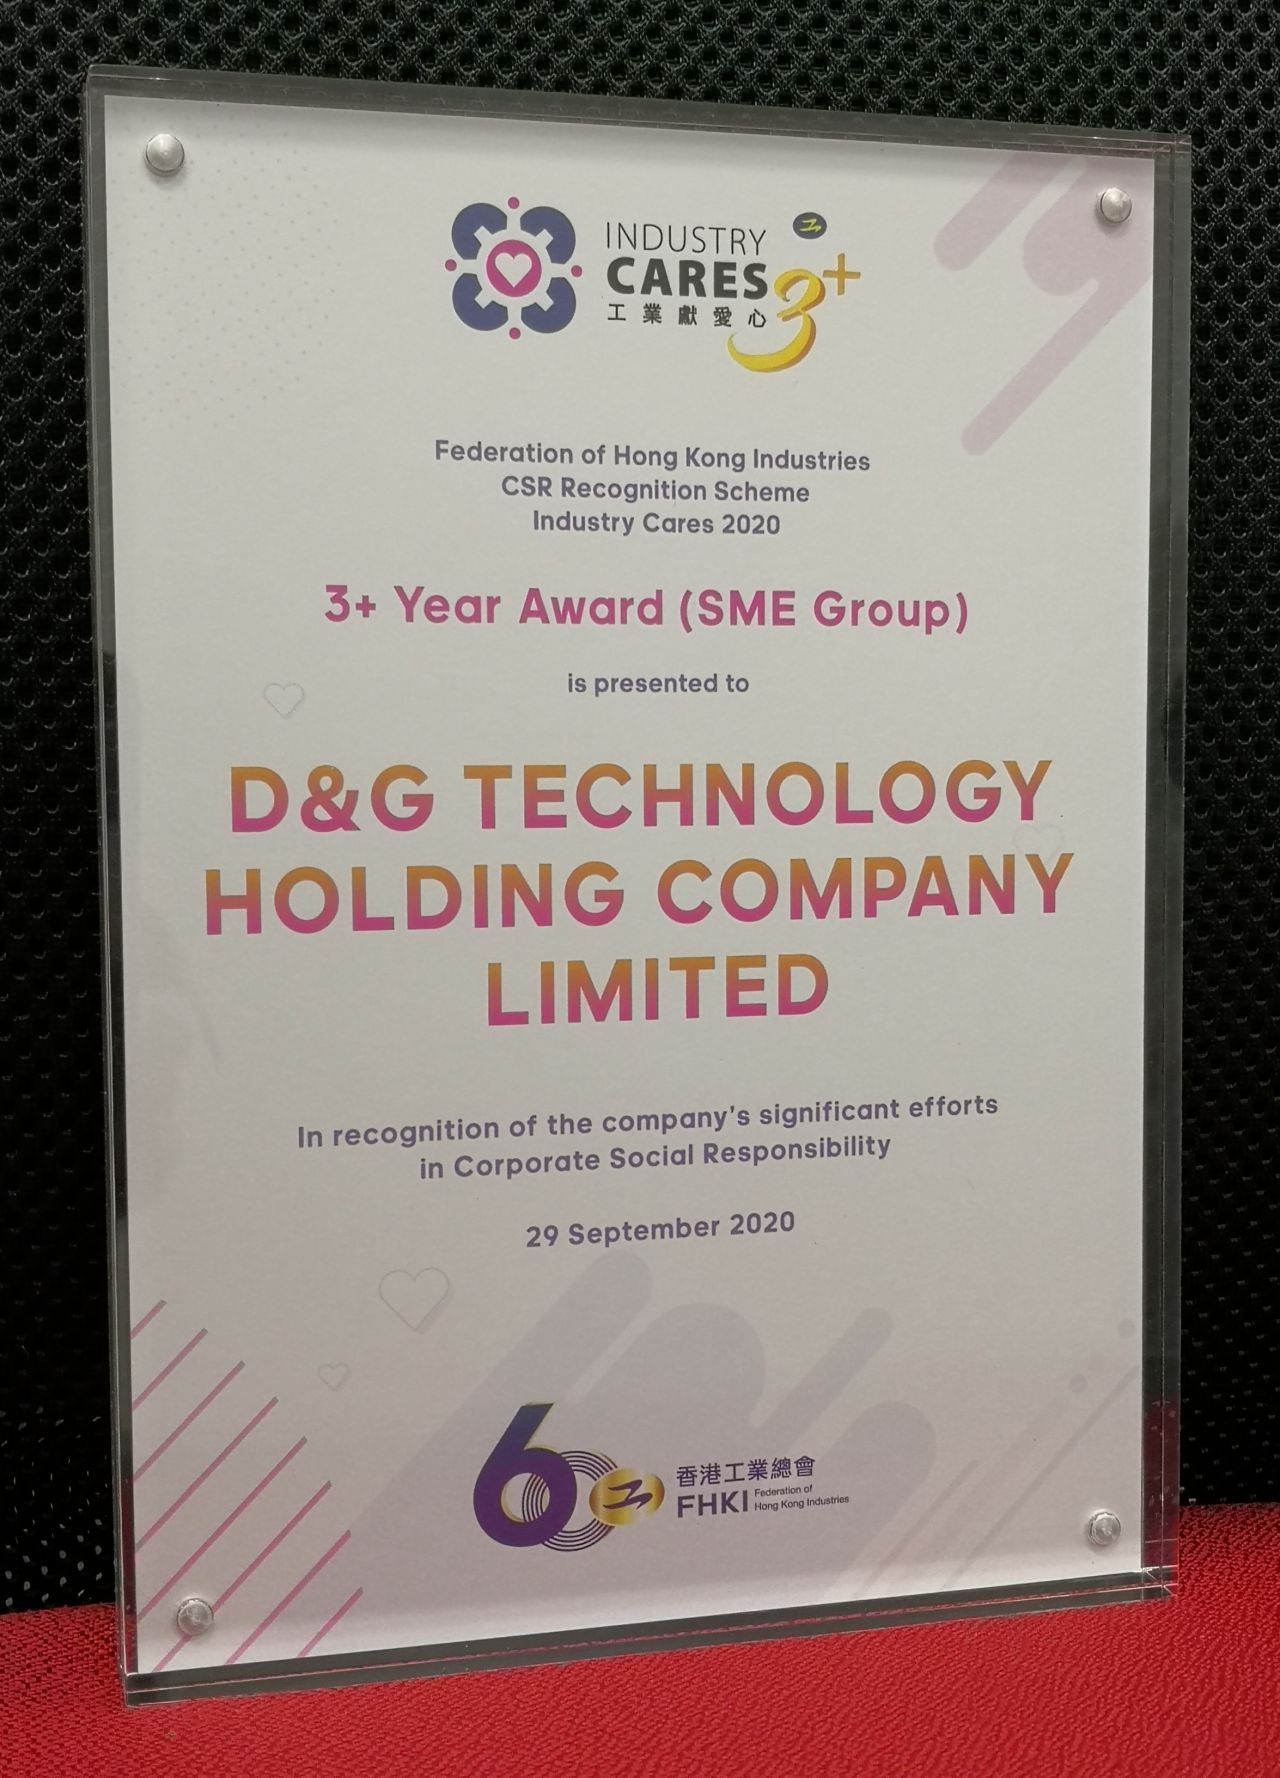 D&G Technology D&G Machinery the 3+ Year Award of Industry Cares 2020